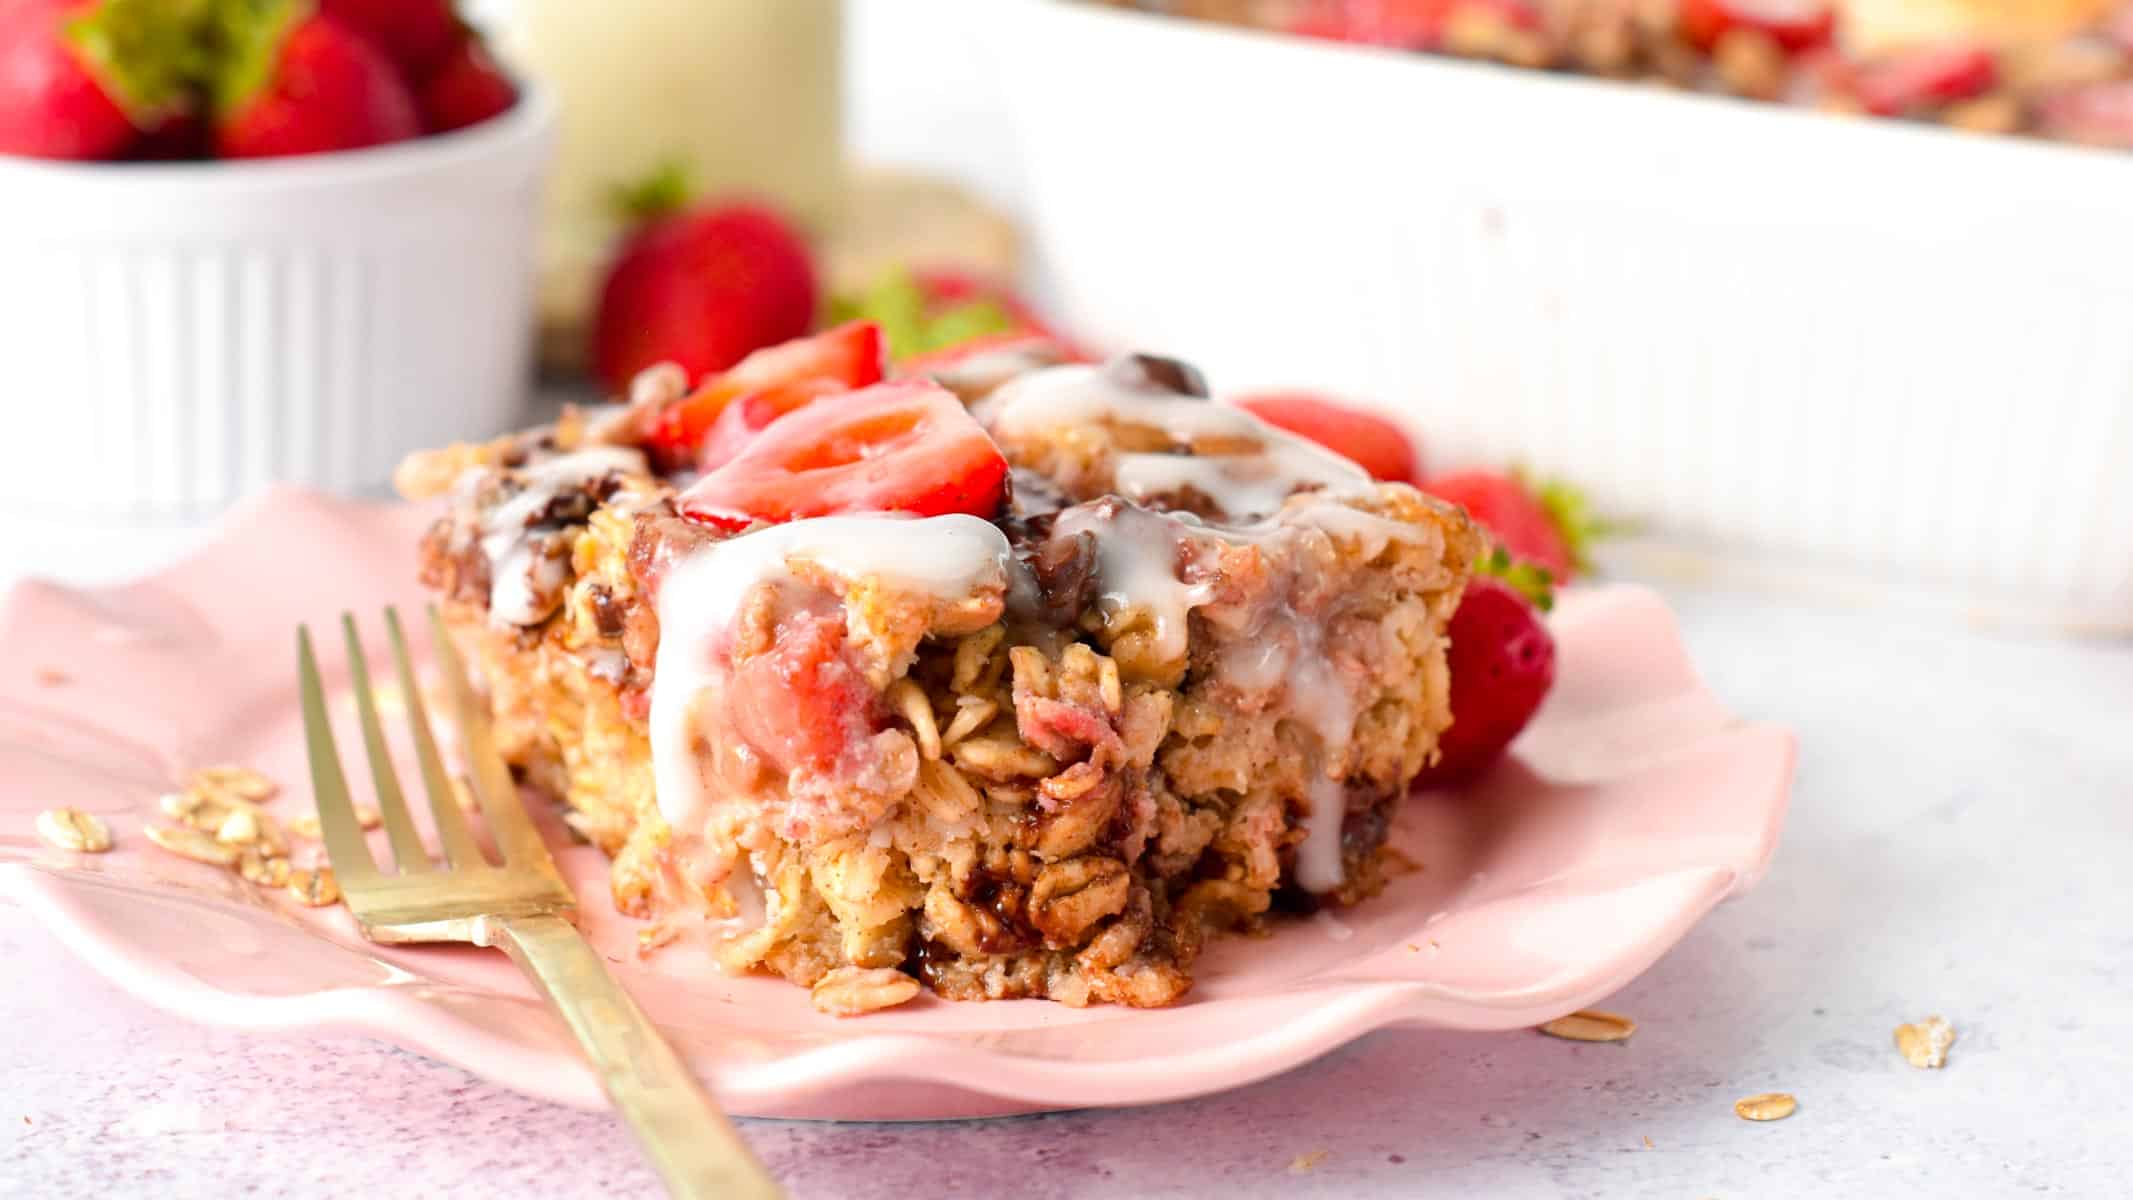 This Strawberry Baked Oatmeal is an easy, healthy one-pan breakfast to meal prep a week of tasty breakfast. You will love the combination of strawberry and chocolate in this creamy oatmeal bake.